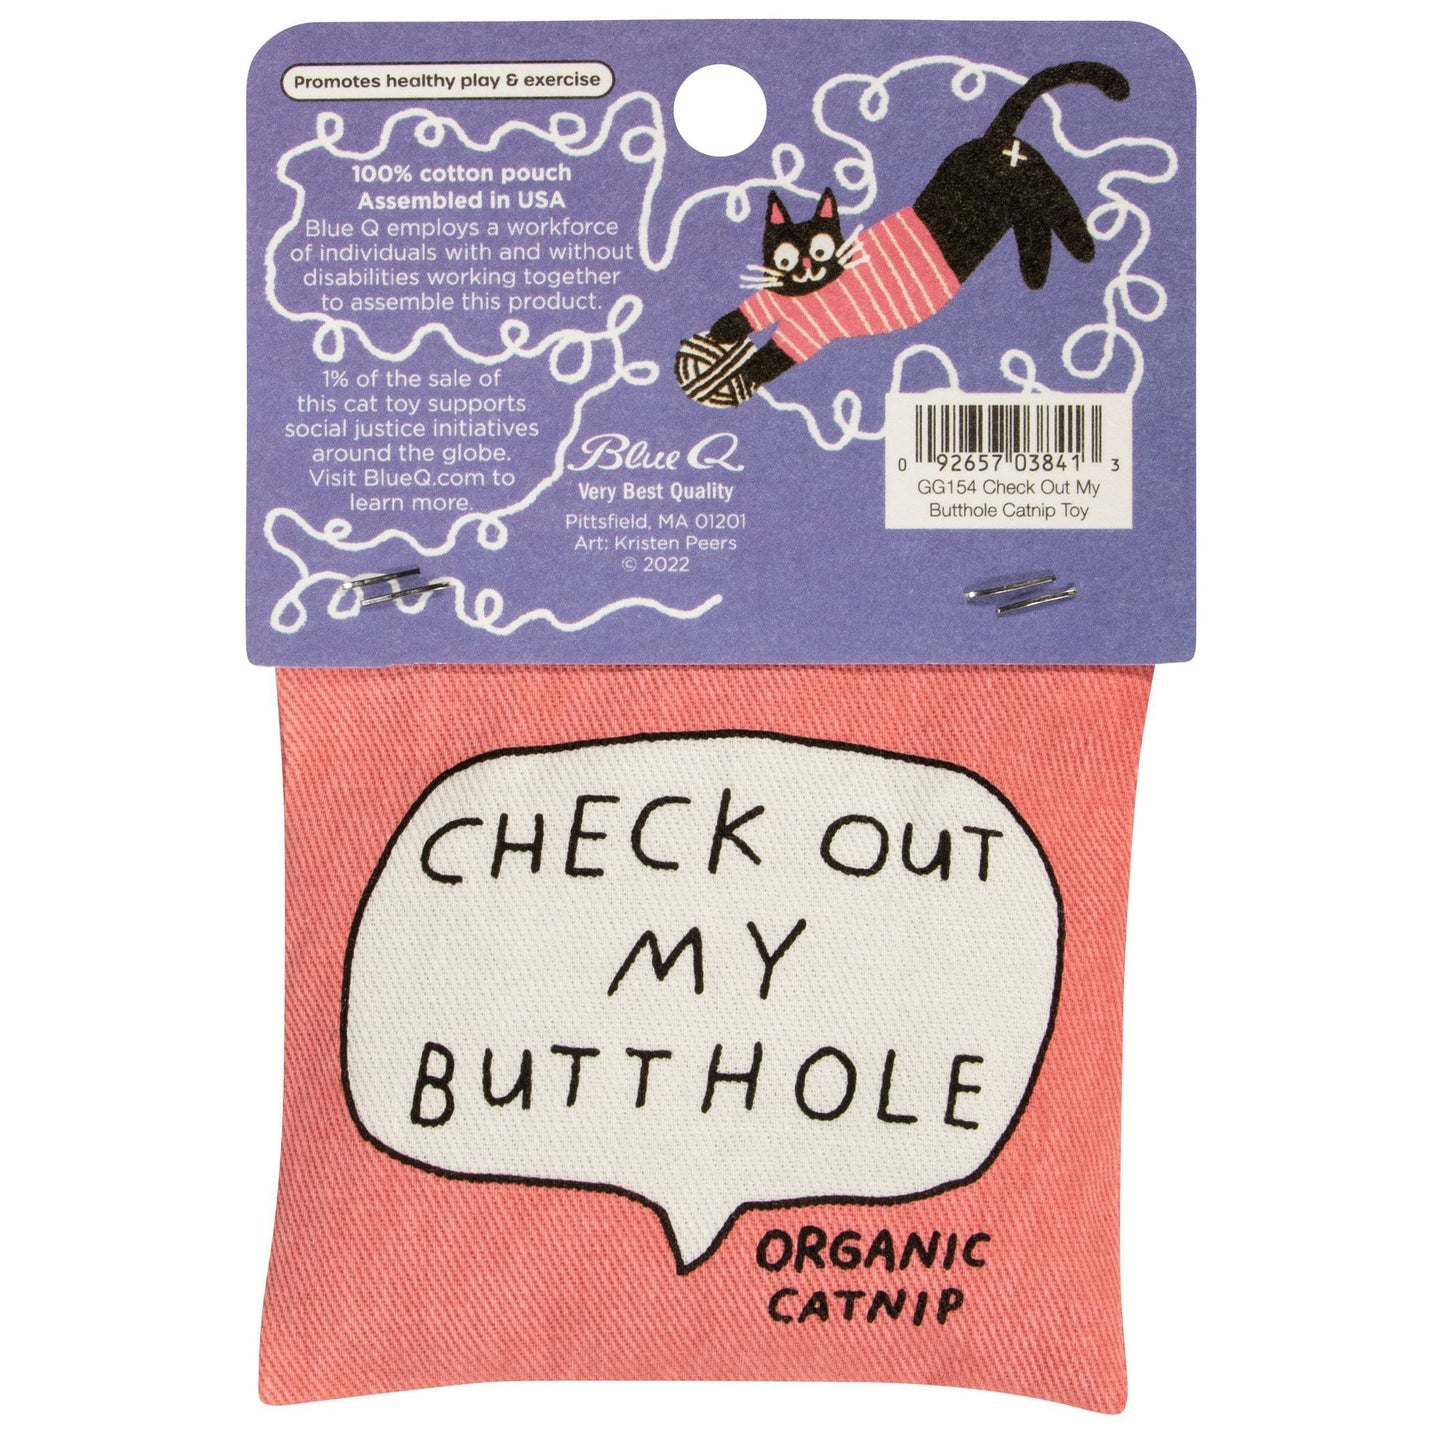 Check Out My Butthole Catnip Toy | Premium Organic Catnip | Illustrated Cotton Pouch